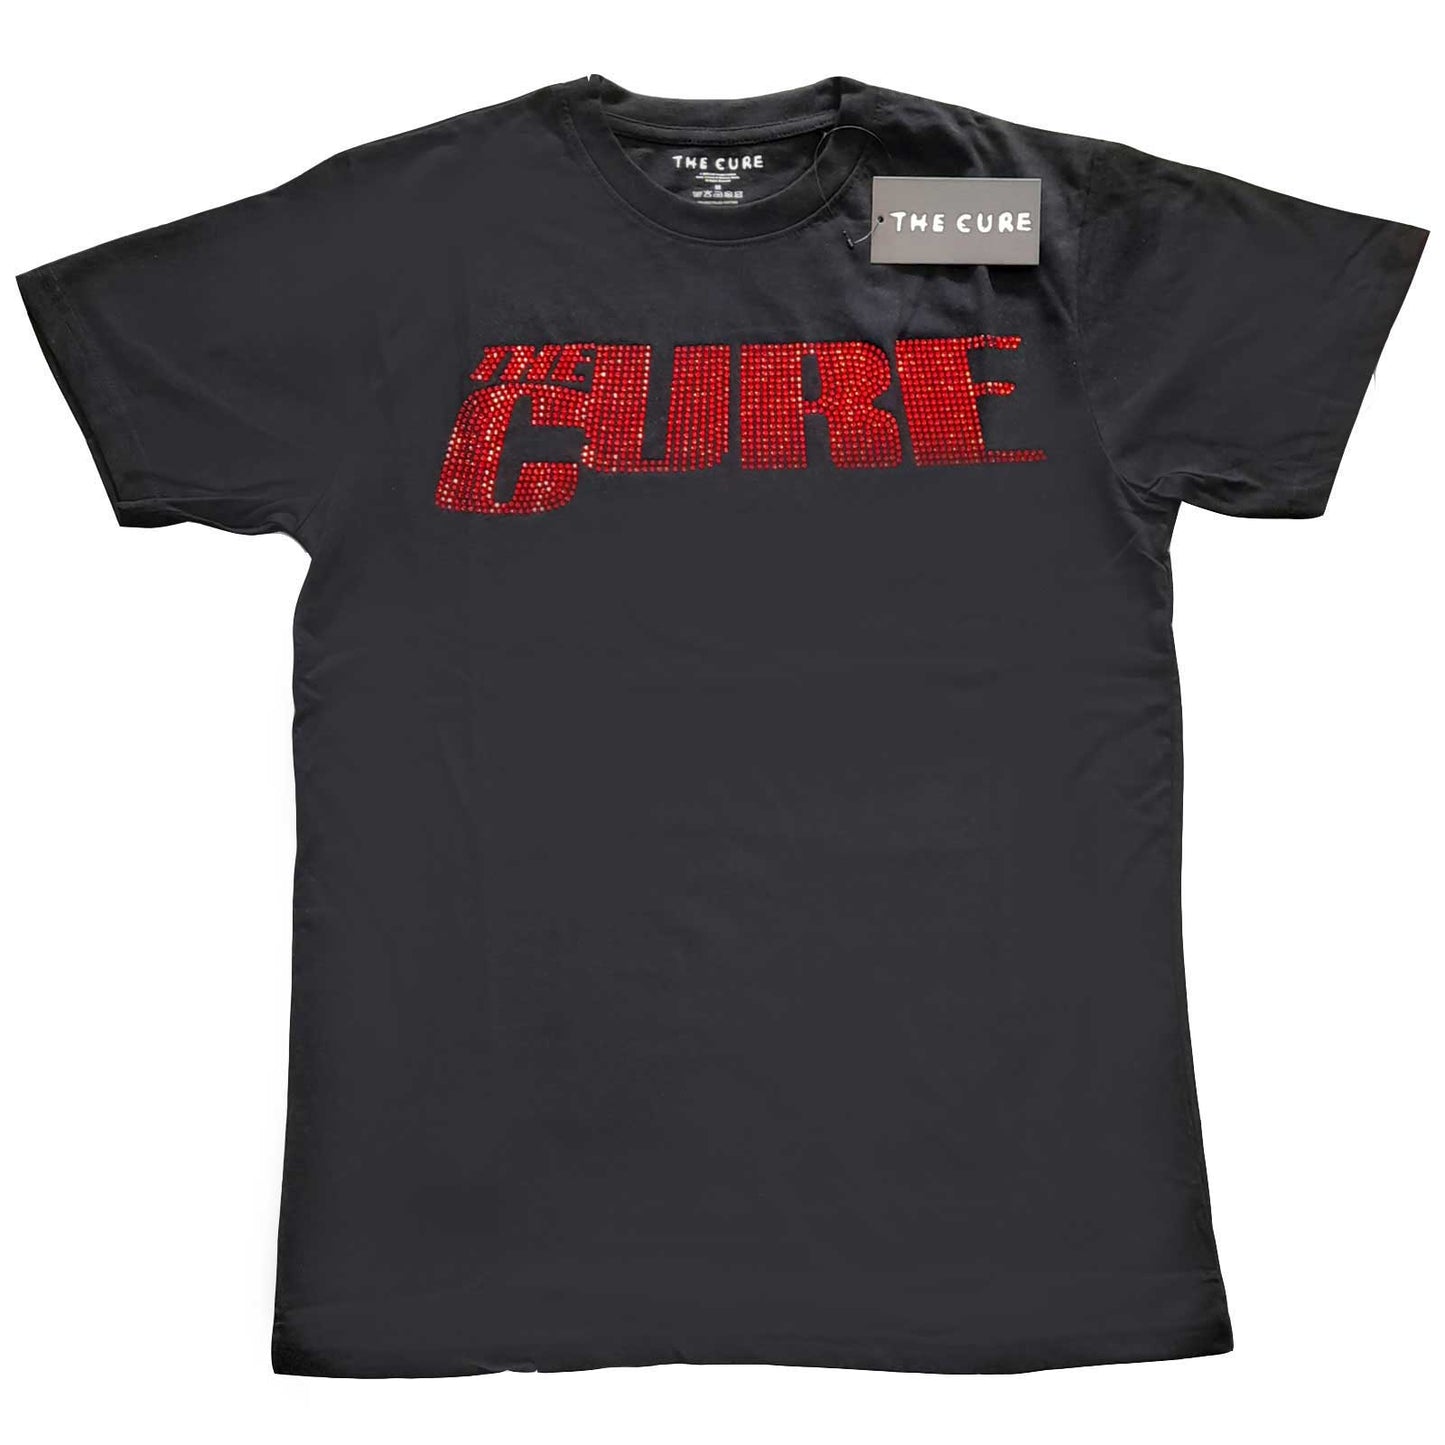 The Cure T-Shirt - Red Logo with Rhinestones (Unisex)